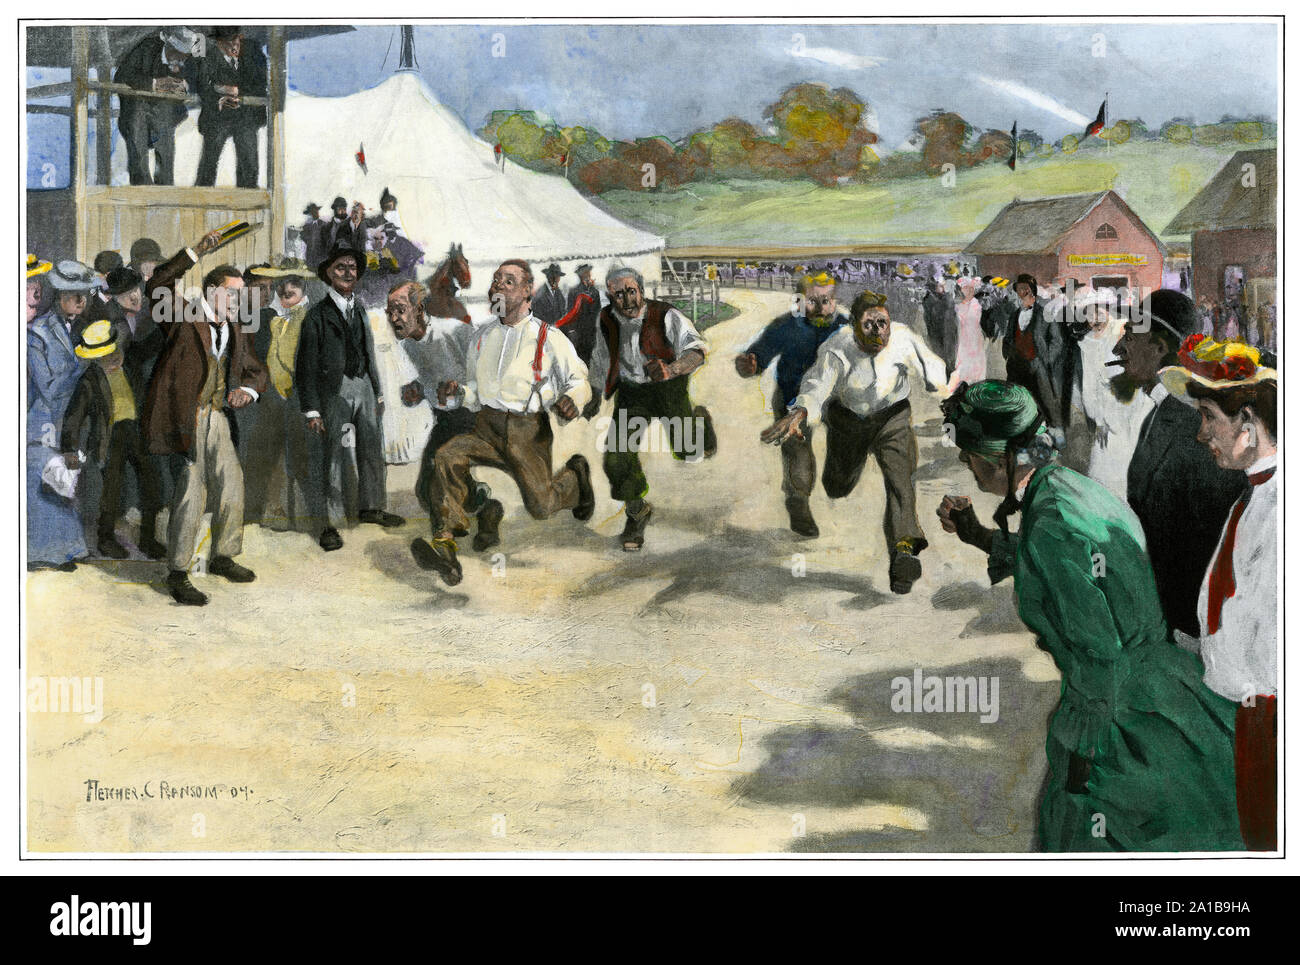 Foot-race at a county fair, circa 1900. Hand-colored halftone of an illustration Stock Photo